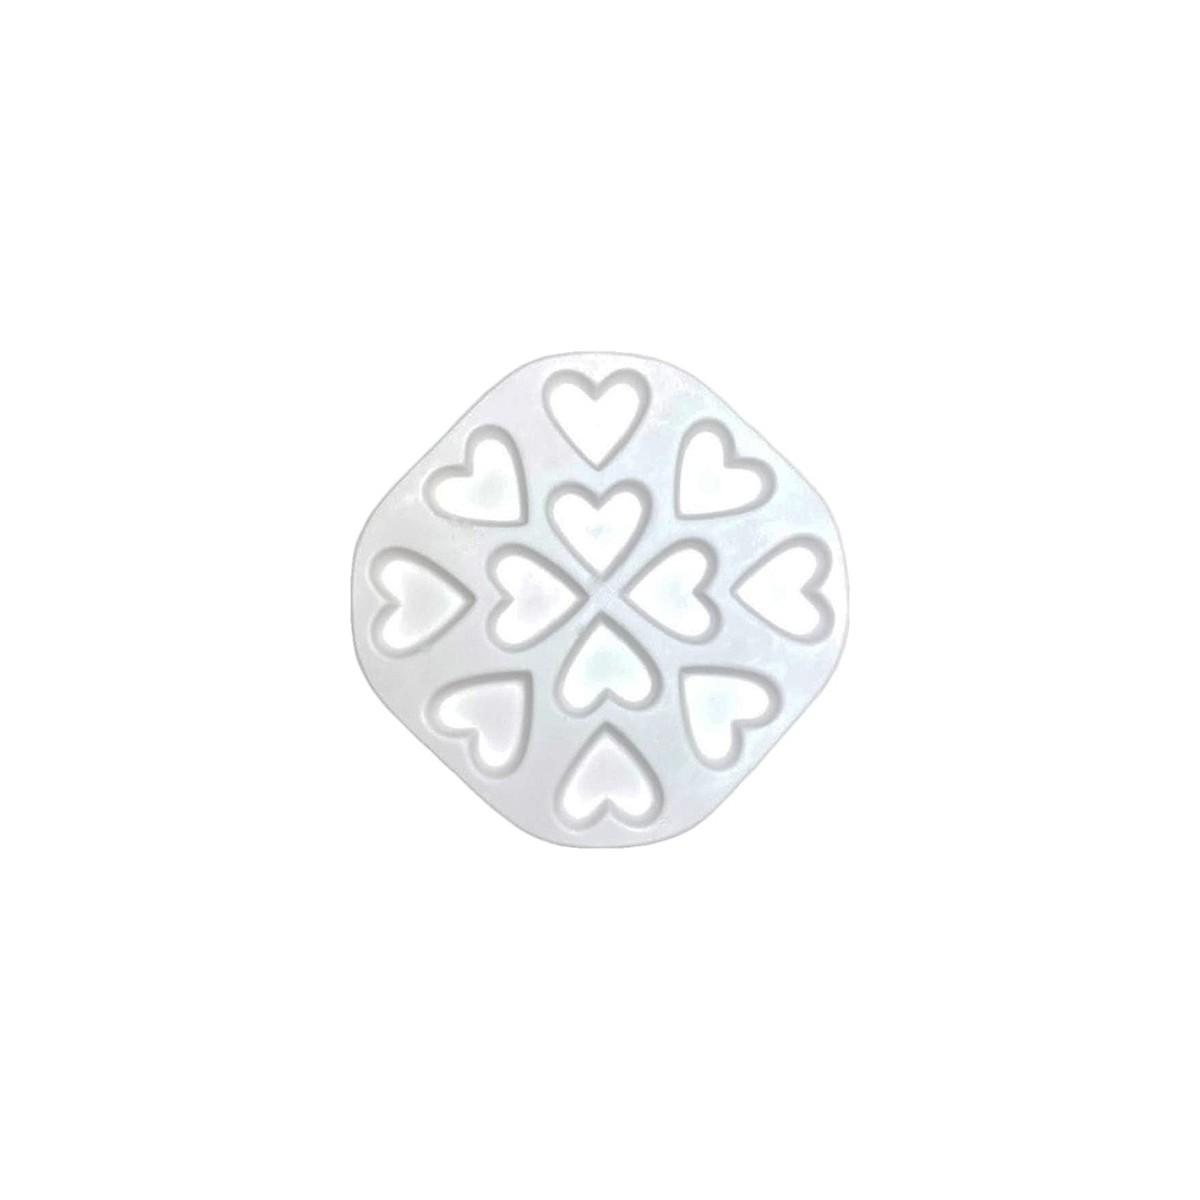 Christian Hearts Soap Mold (MW 508) - Crafter's Choice